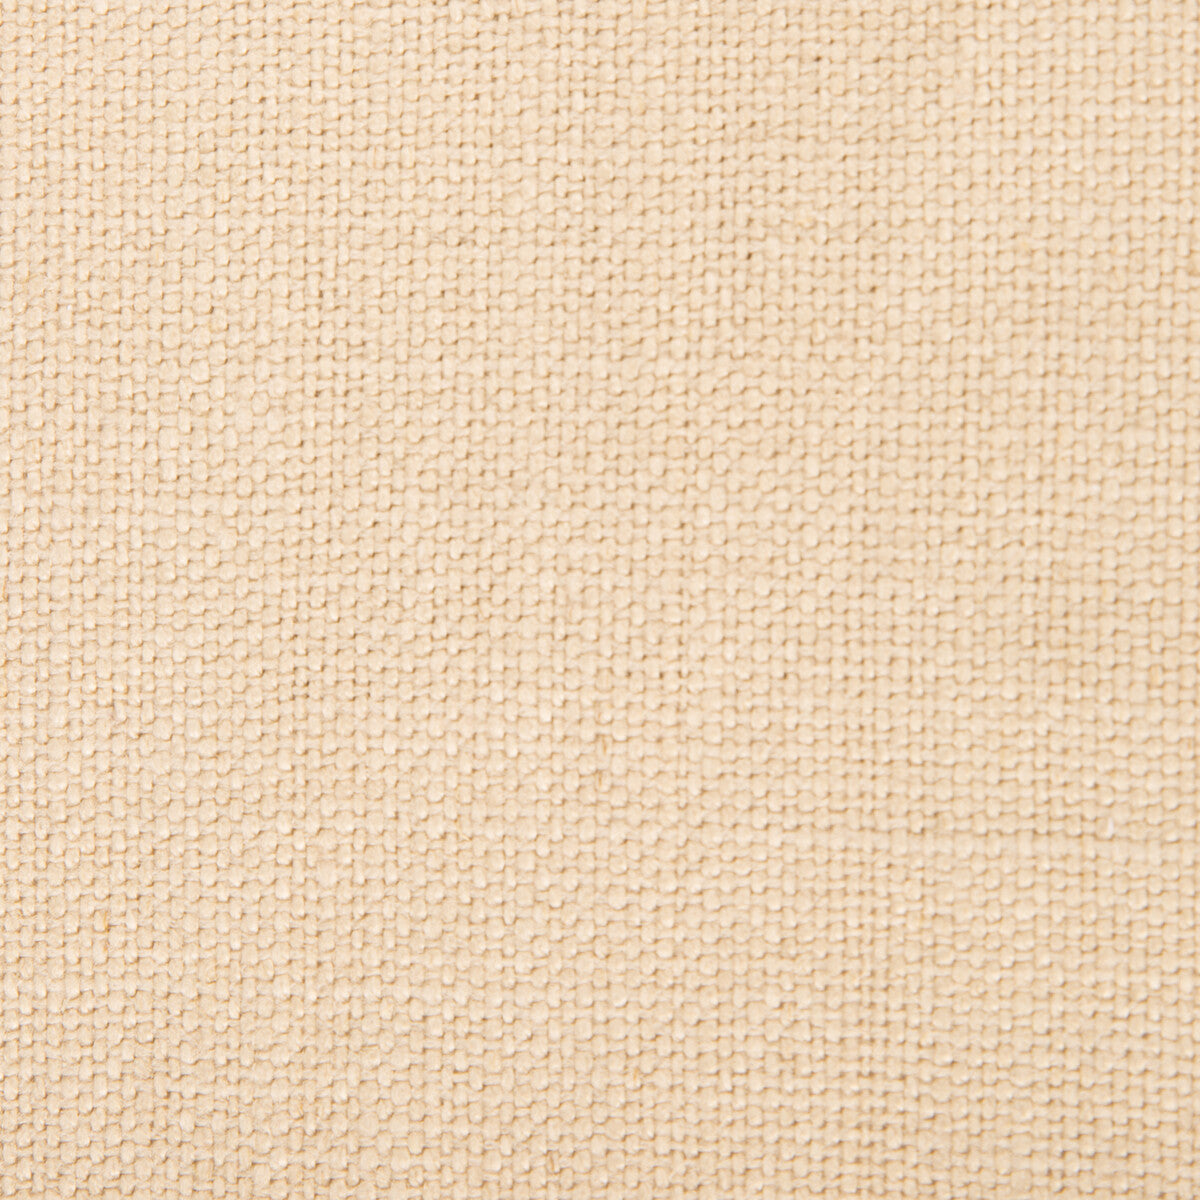 Nicaragua fabric in arena color - pattern GDT5239.022.0 - by Gaston y Daniela in the Basics collection